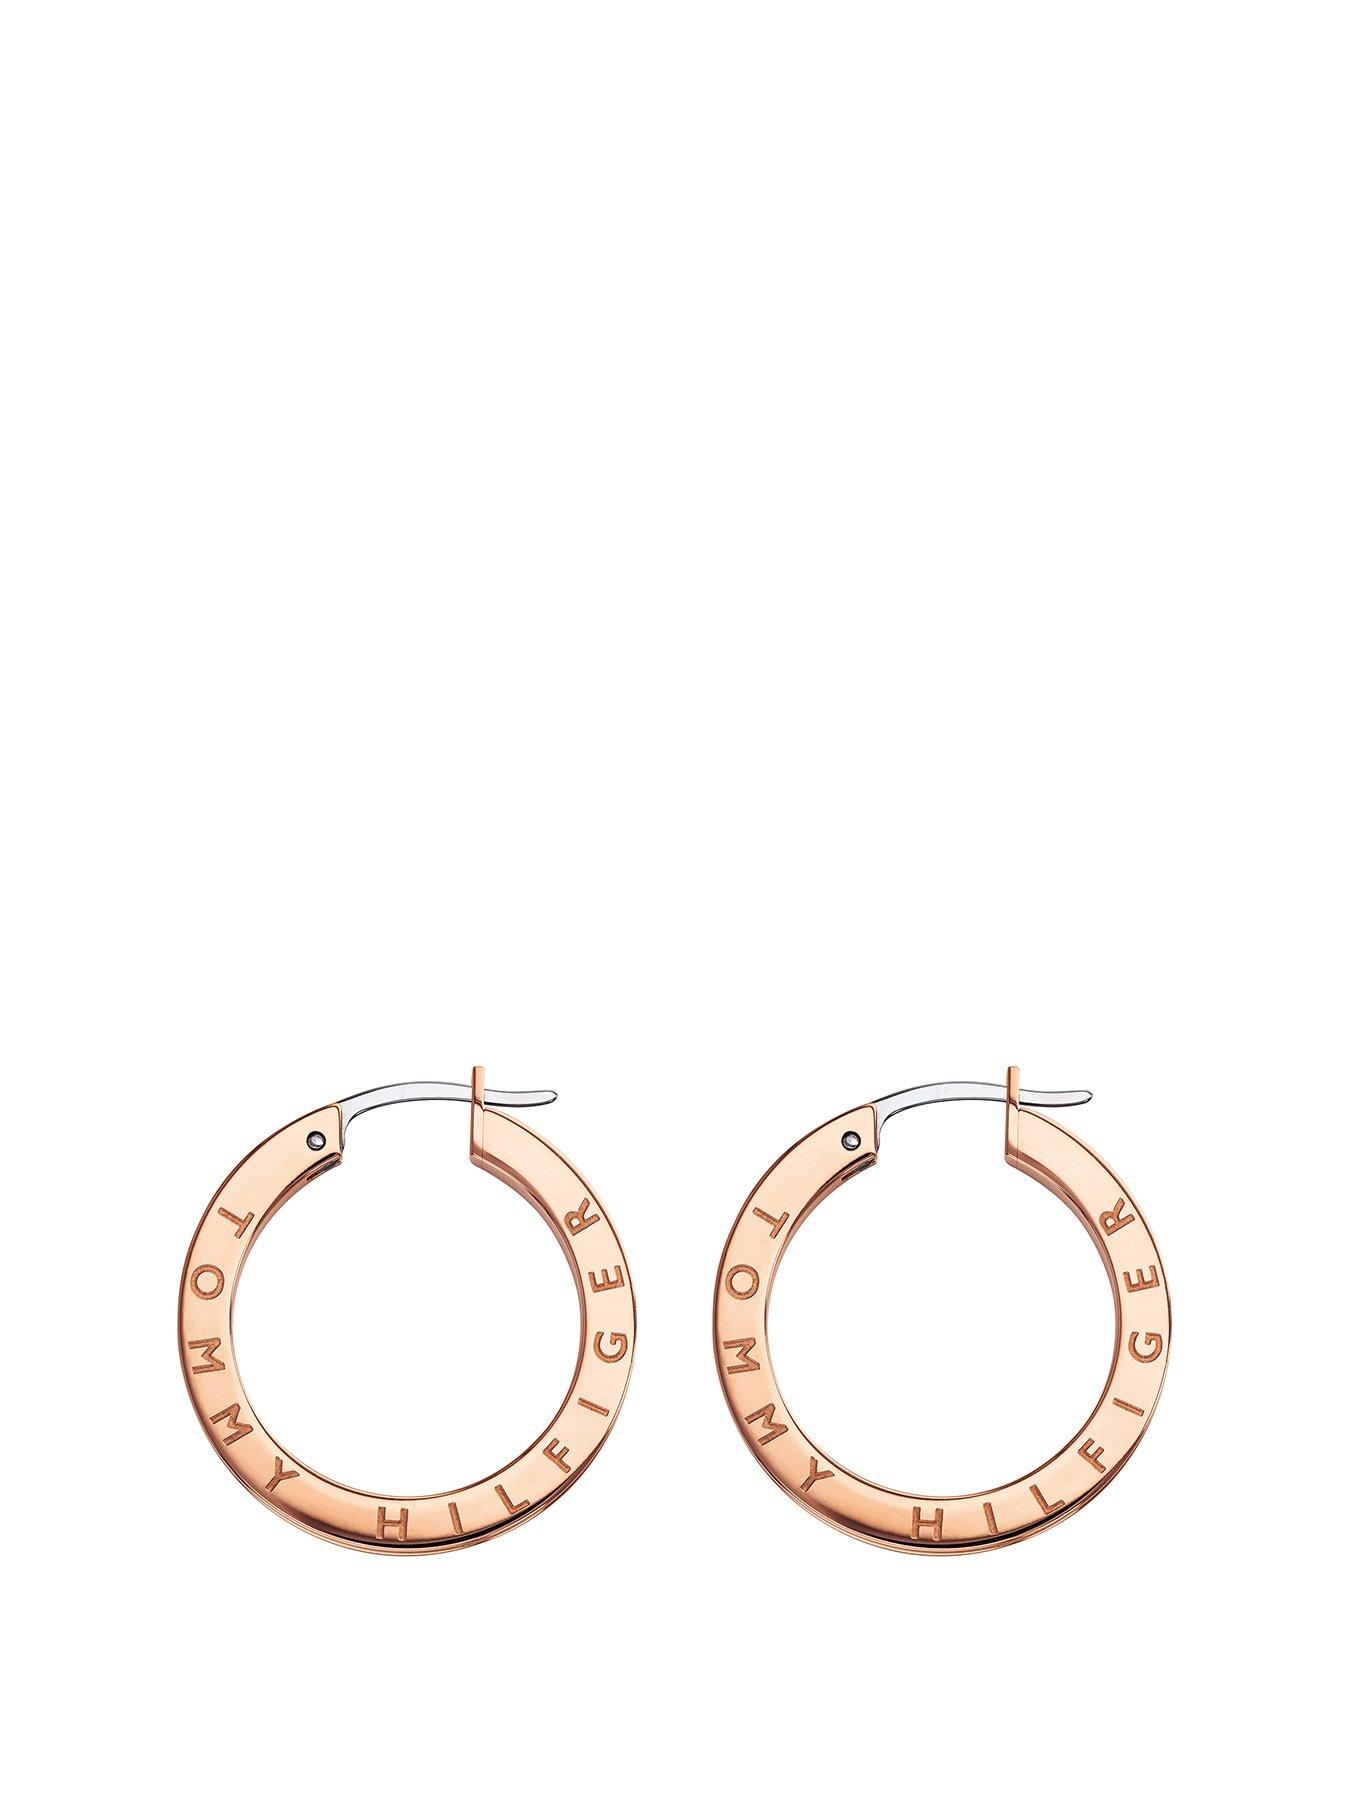 tommy hilfiger rose gold earrings